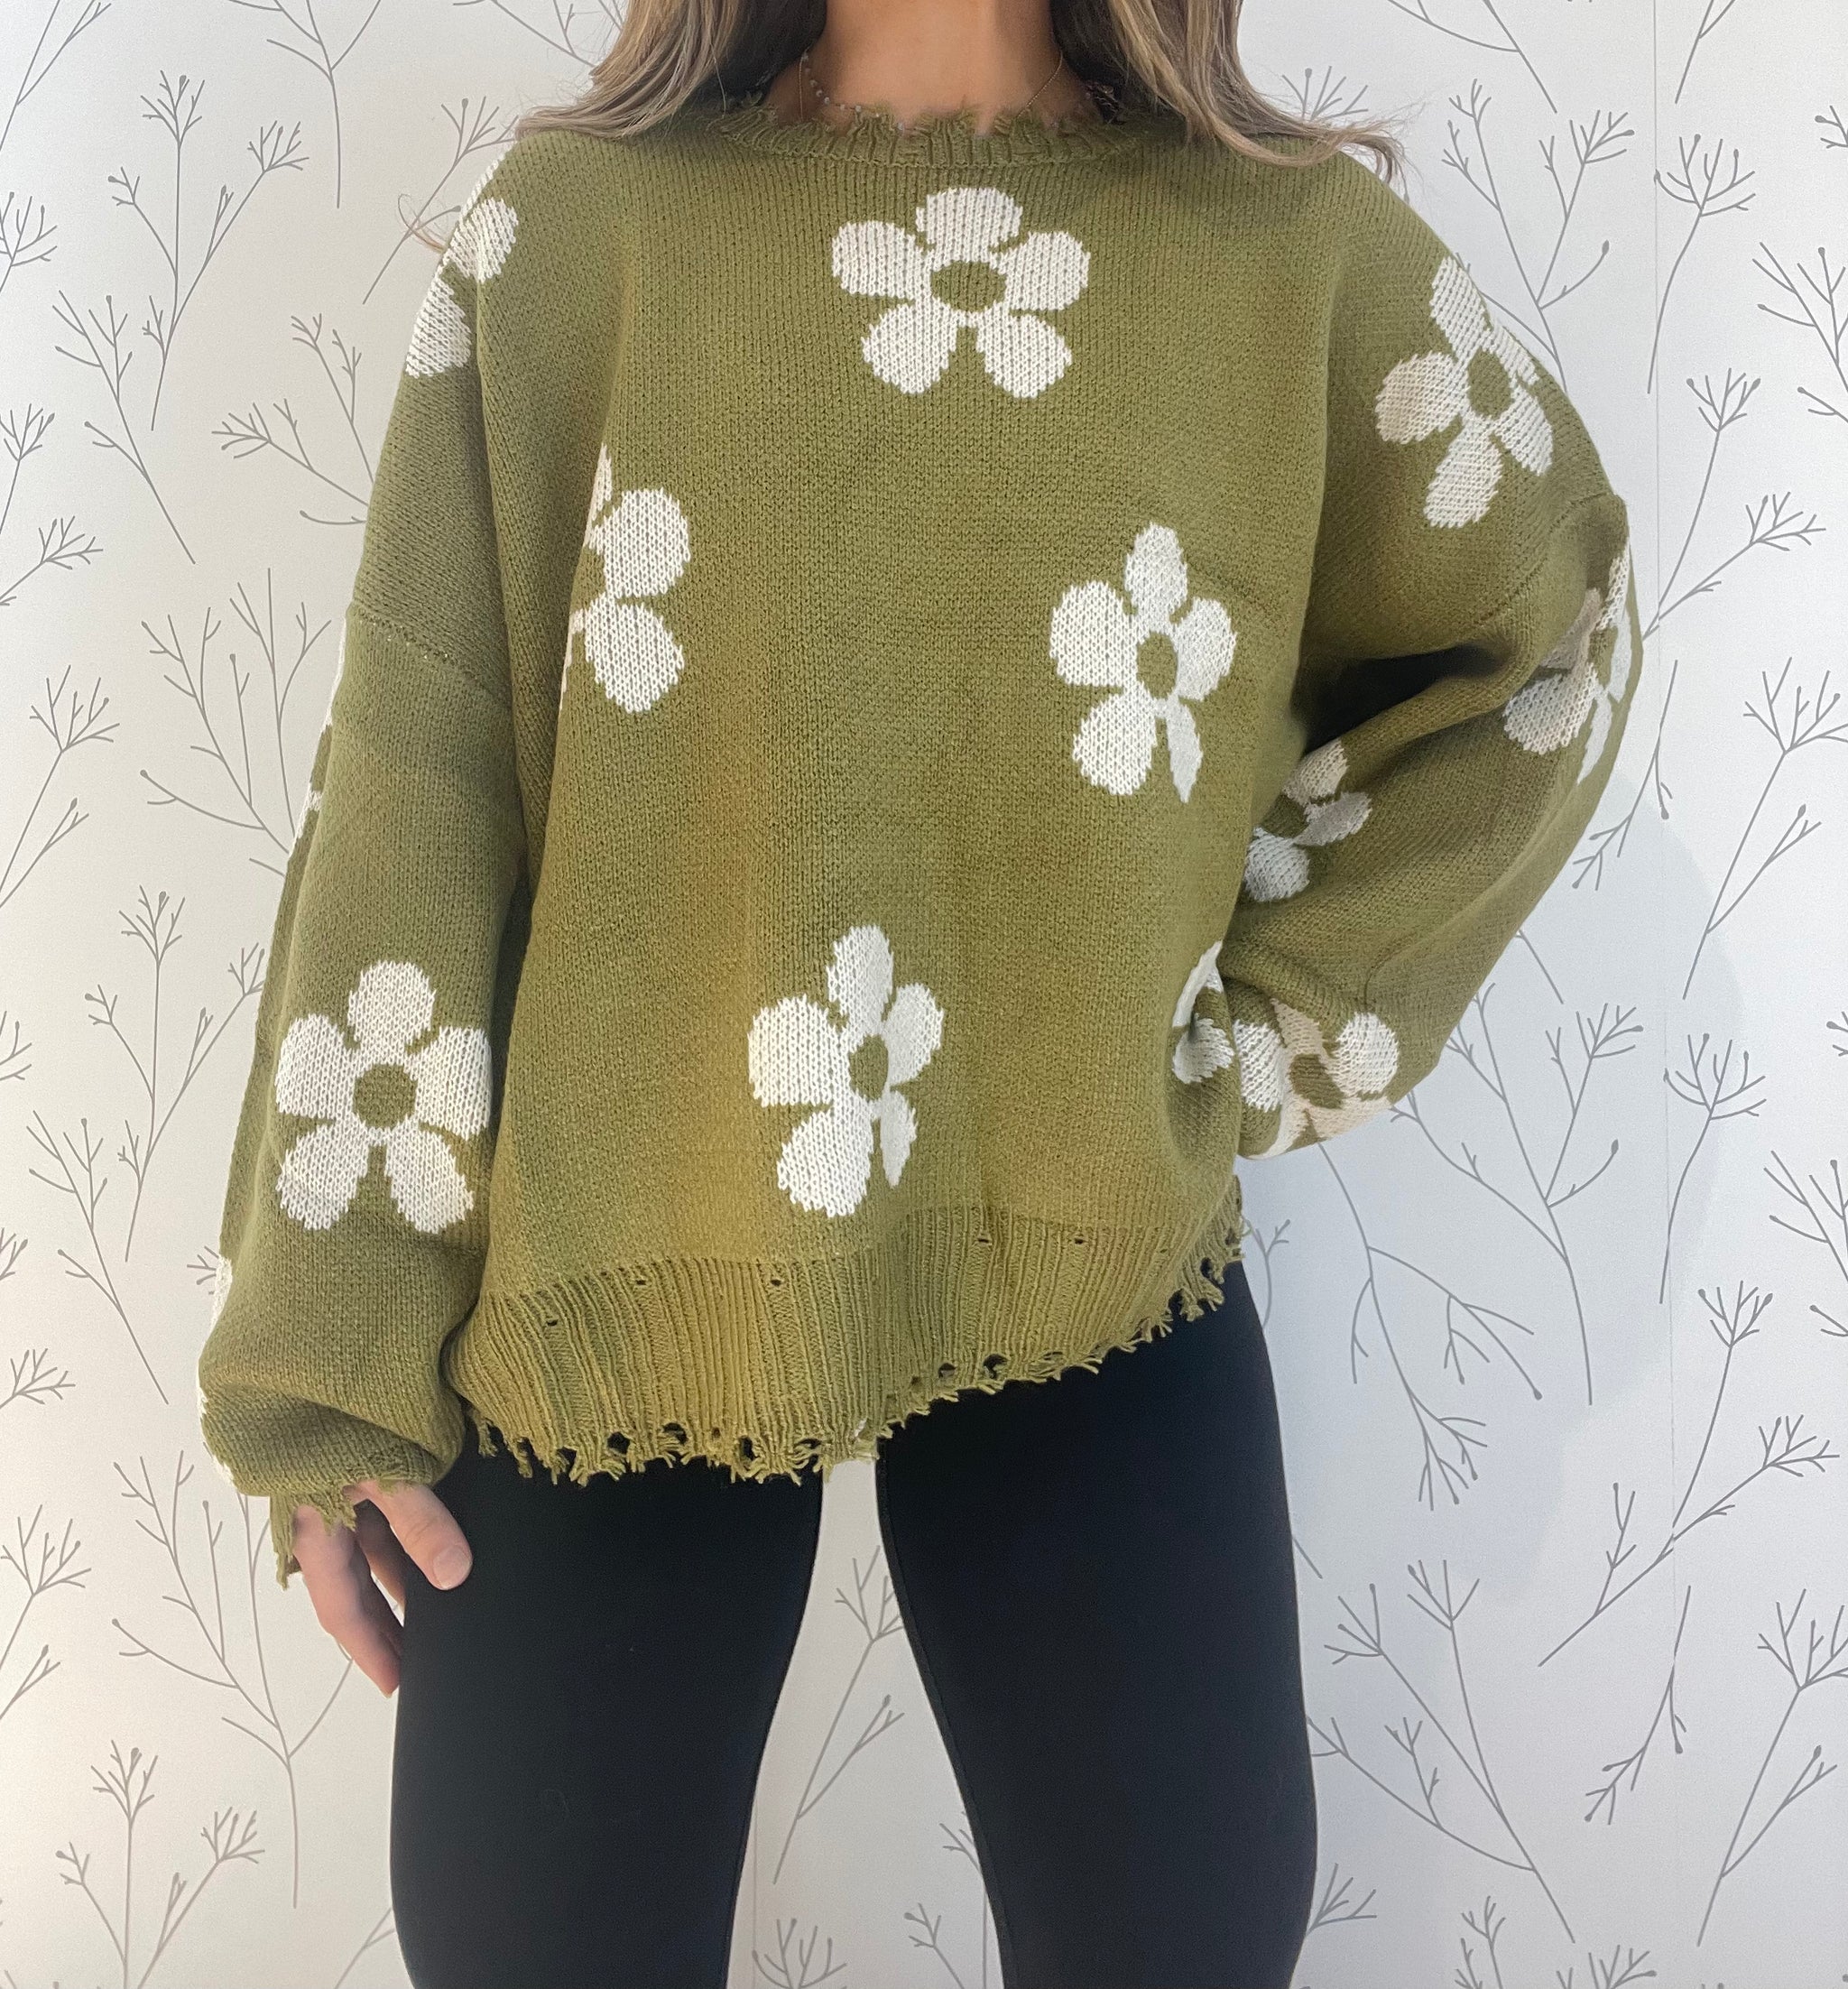 Distressed Floral Patterned Sweater - Plus